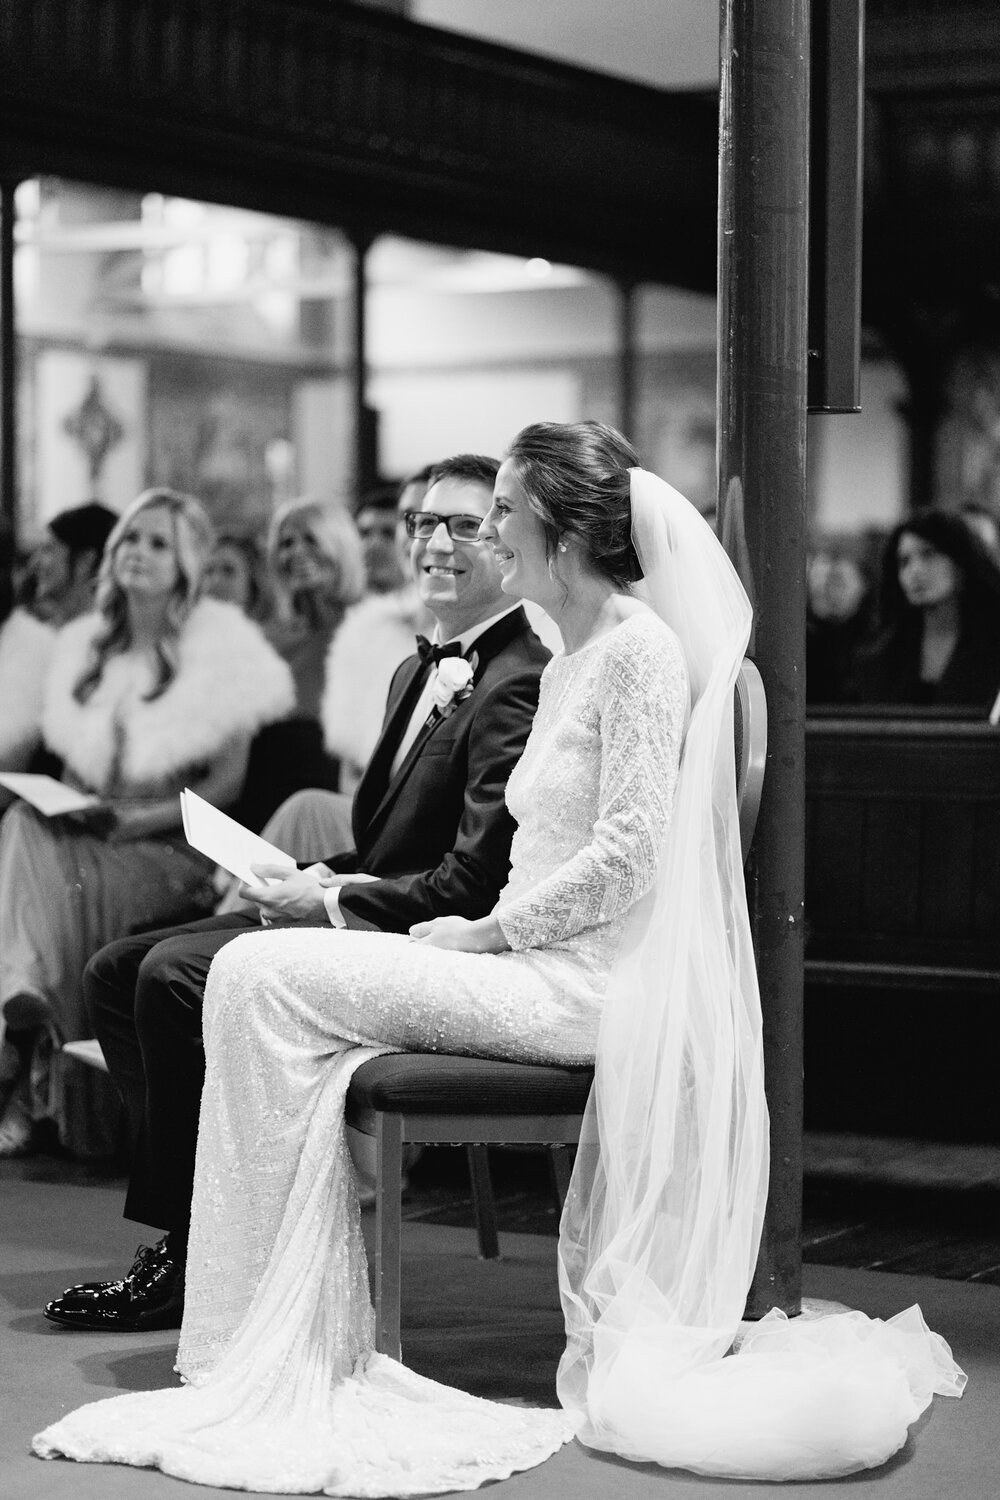 Bride and groom sit during wedding service at St Pauls Knightsbridge while readings take place